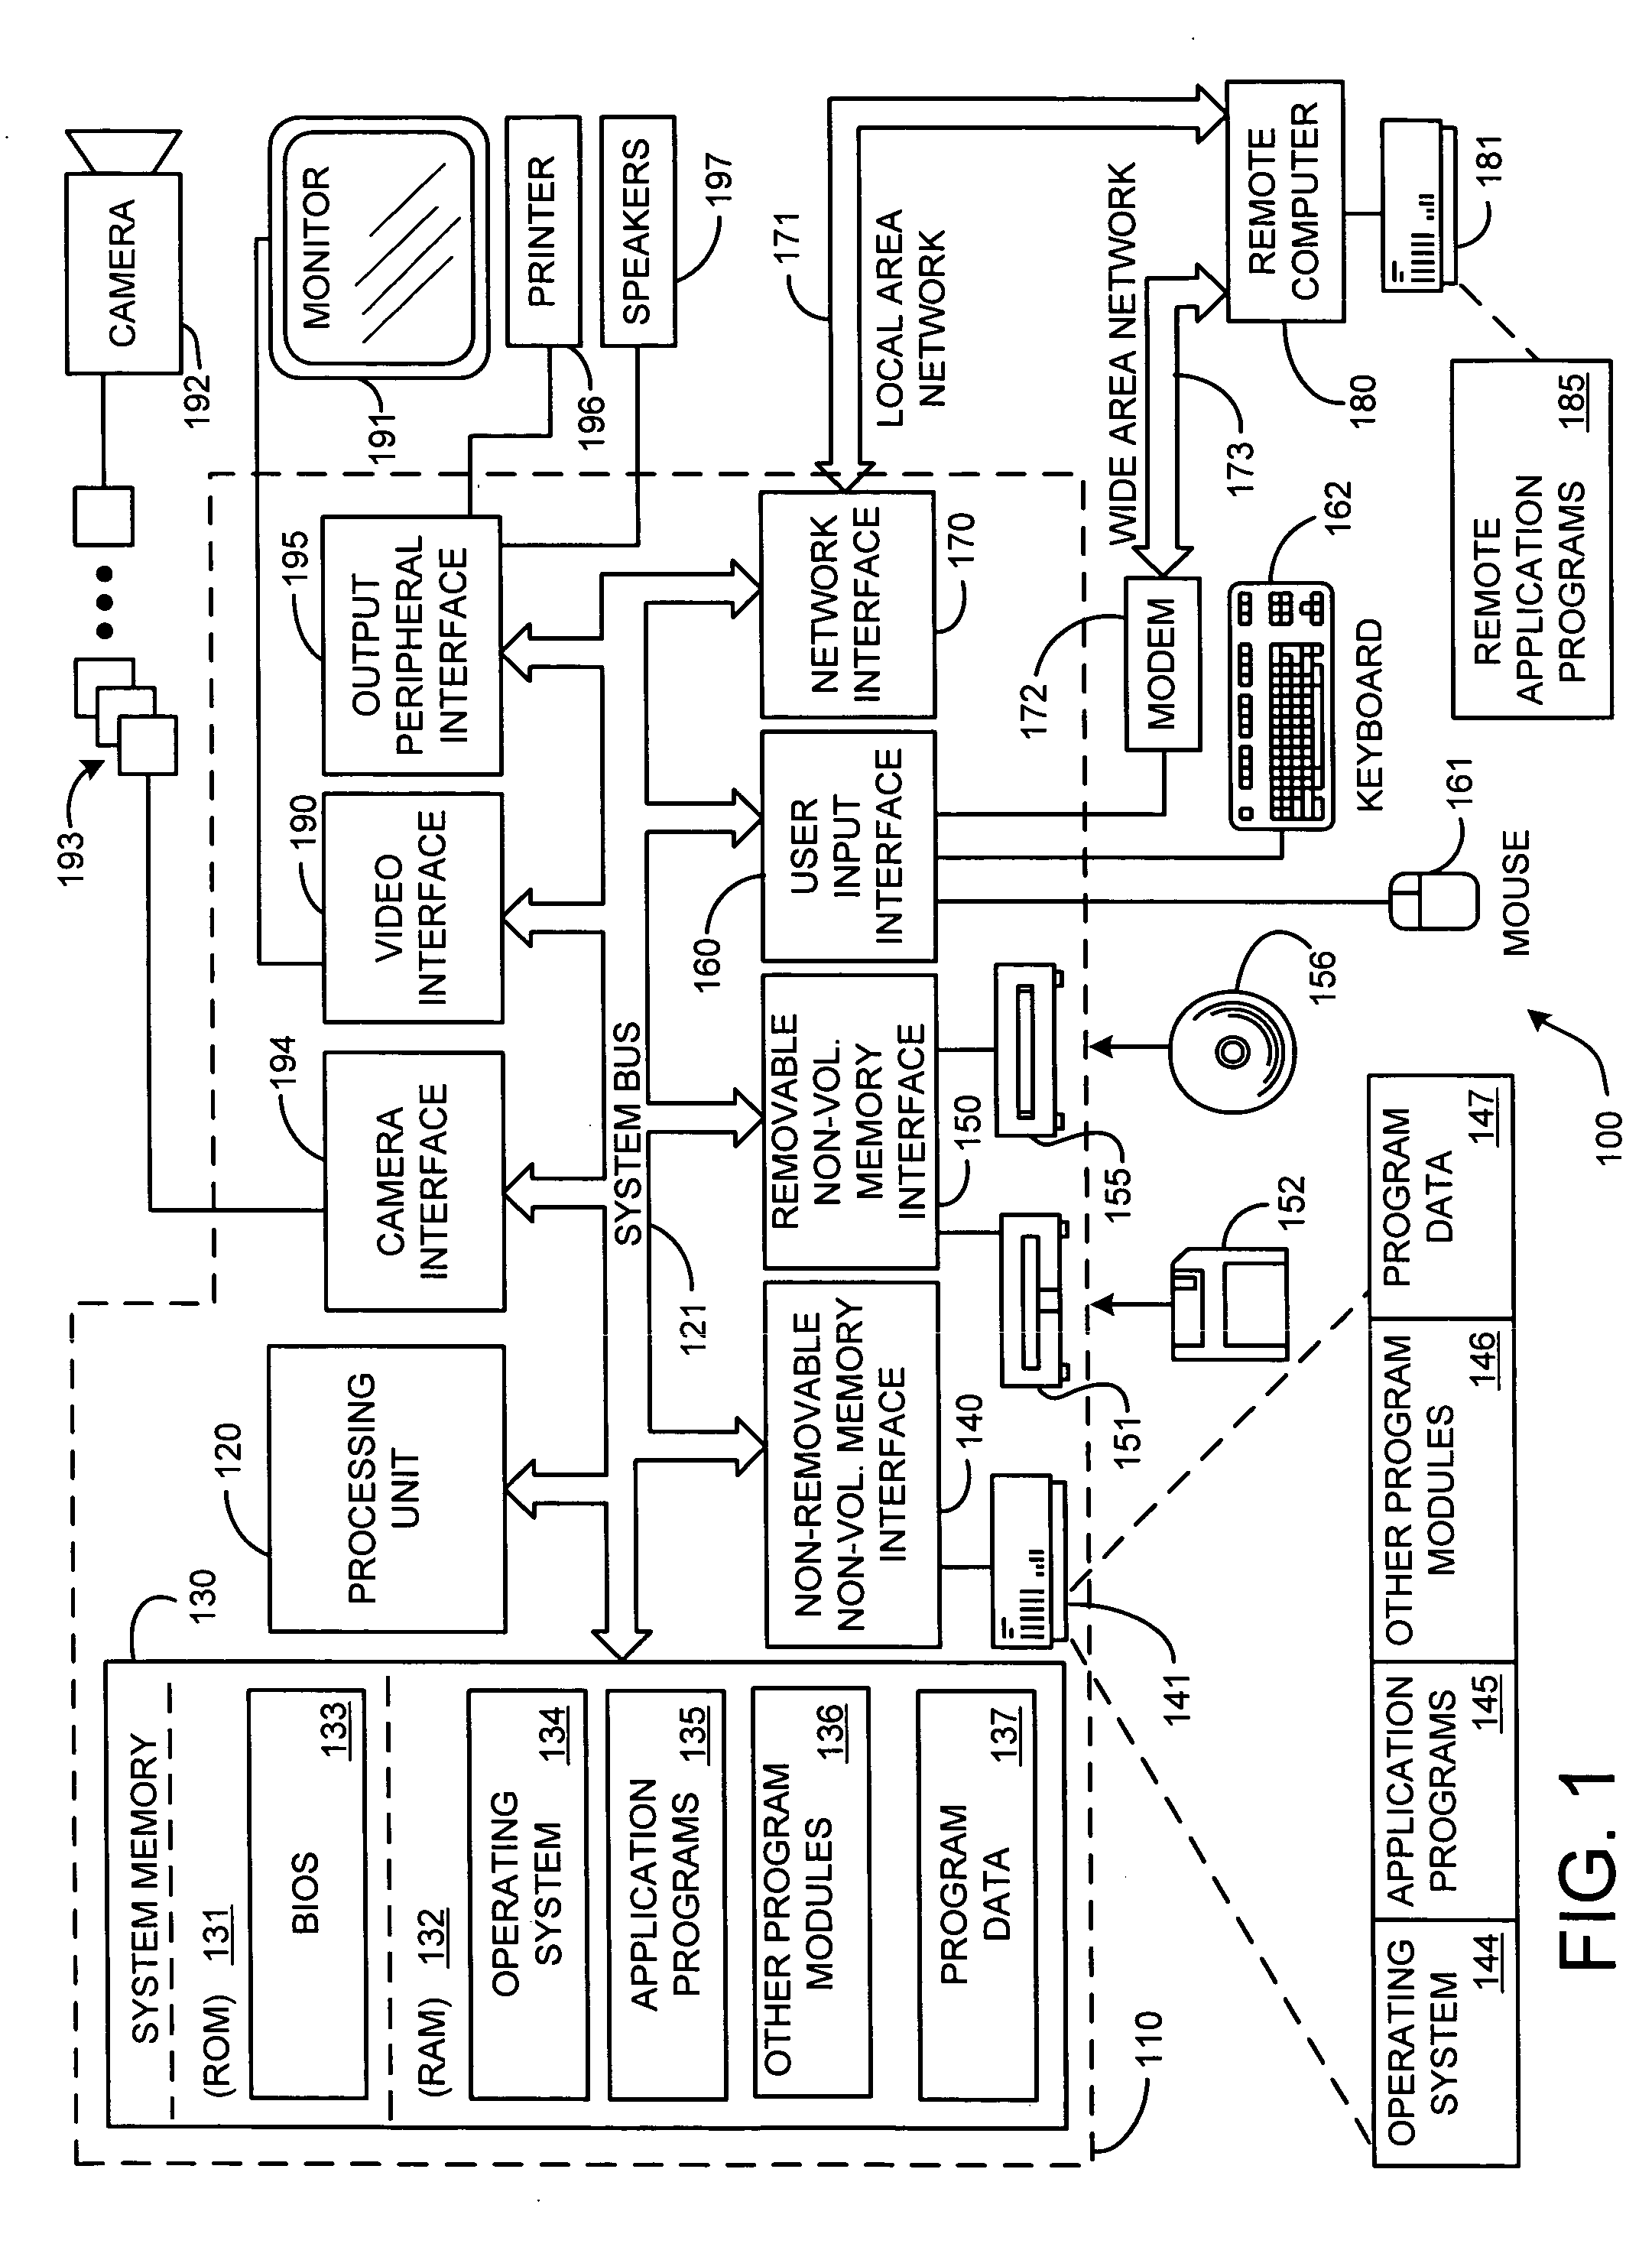 System and process for automatically explaining probabilistic predictions